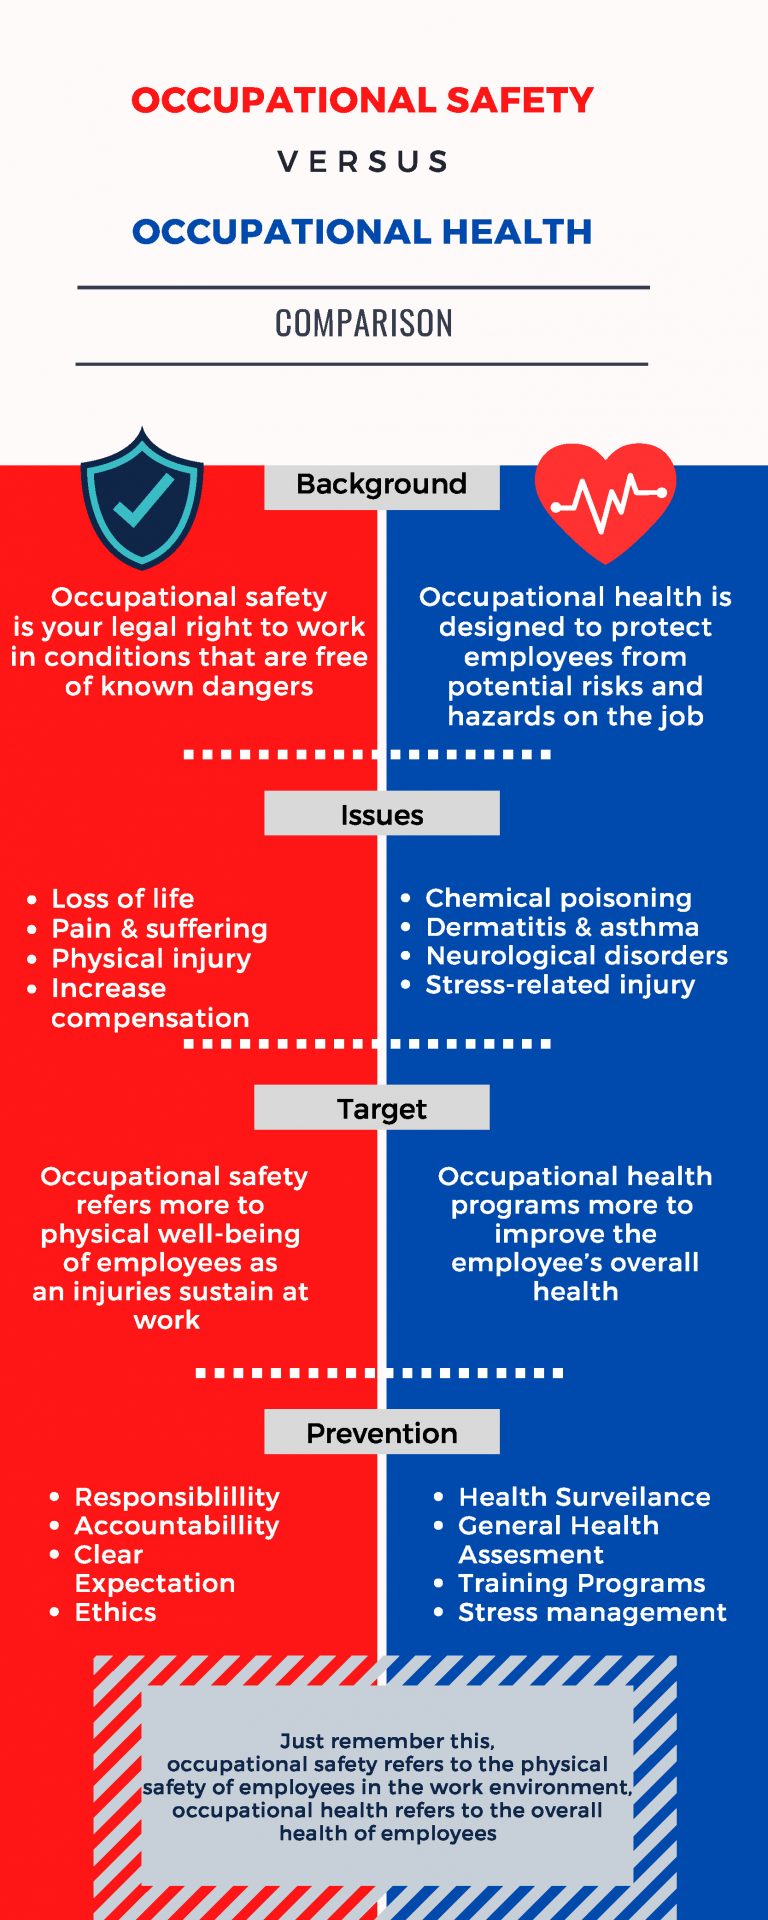 Occupational Safety vs. Occupational Health